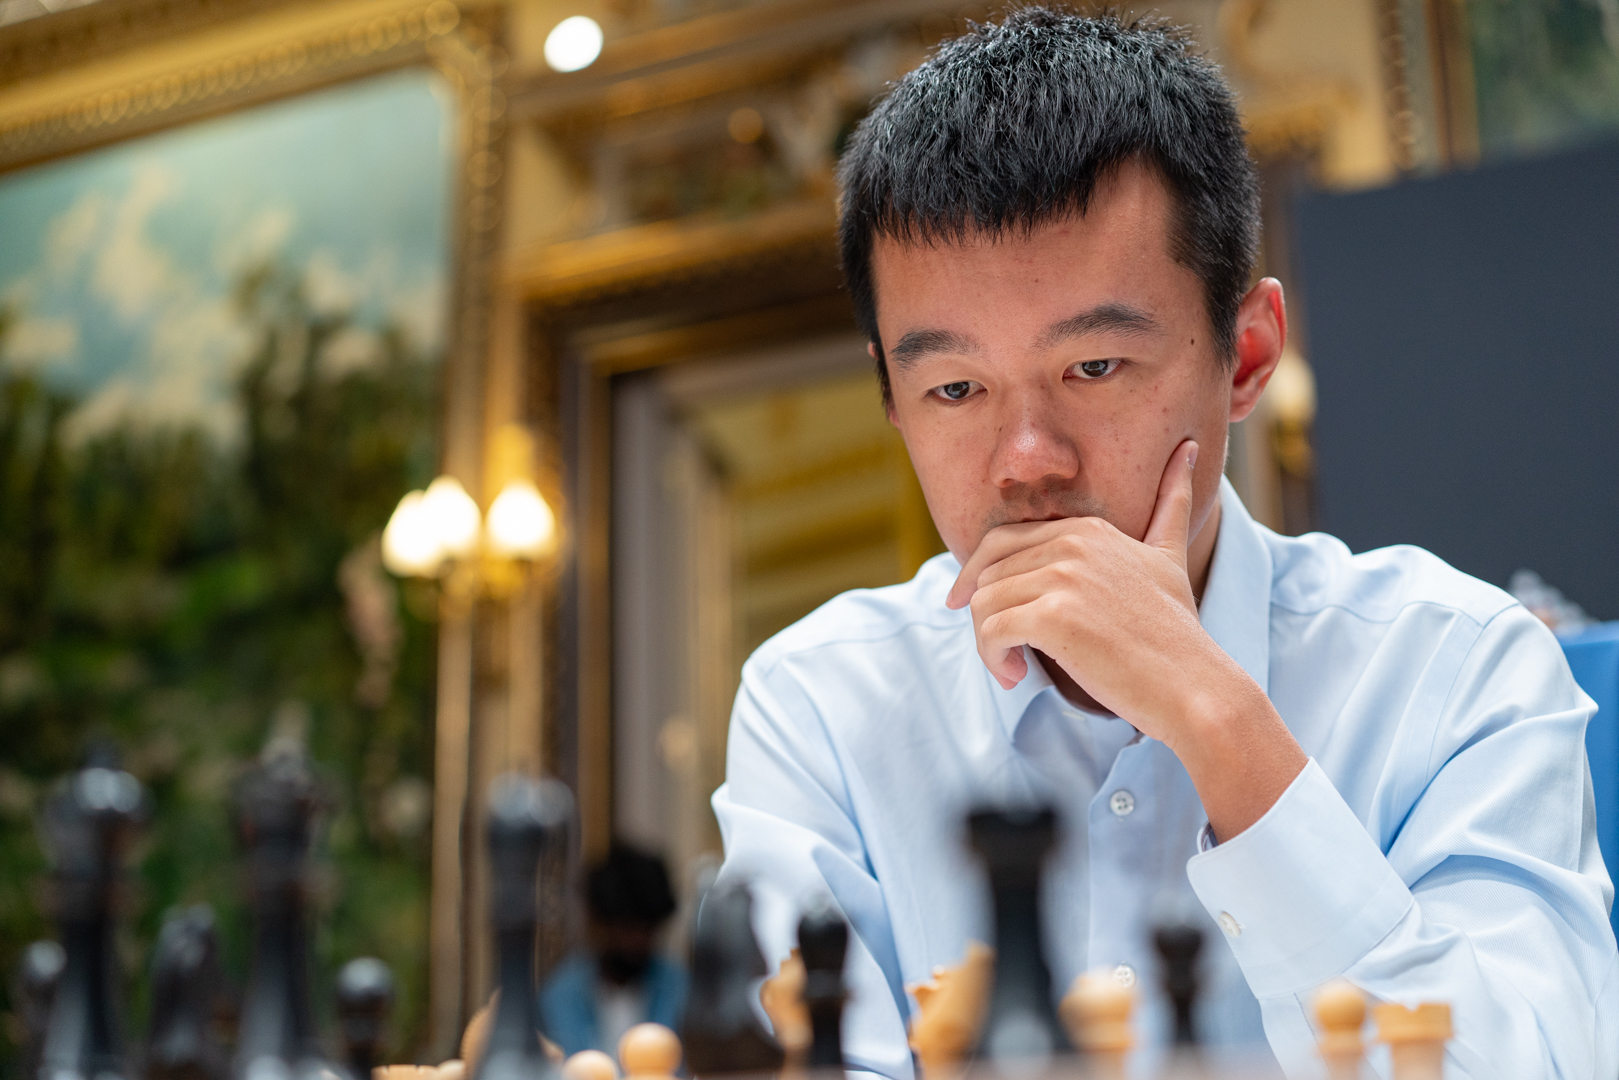 Ding Takes Second in Action-Packed Final Round